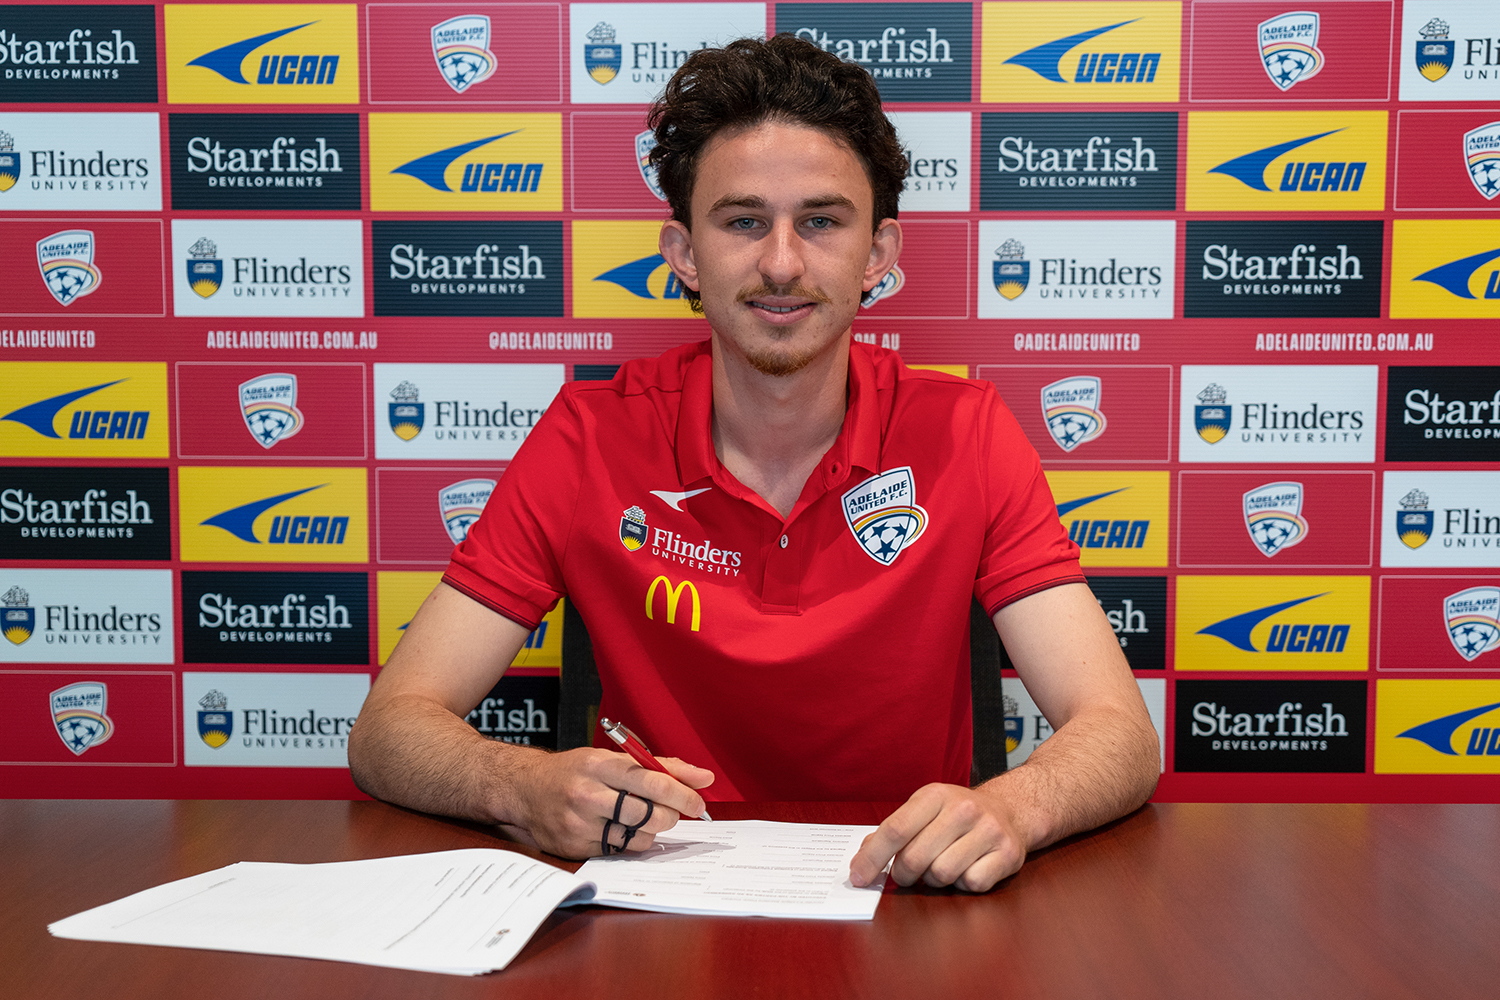 Dom Costanzo has signed a scholarship with Adelaide United for 2020/21